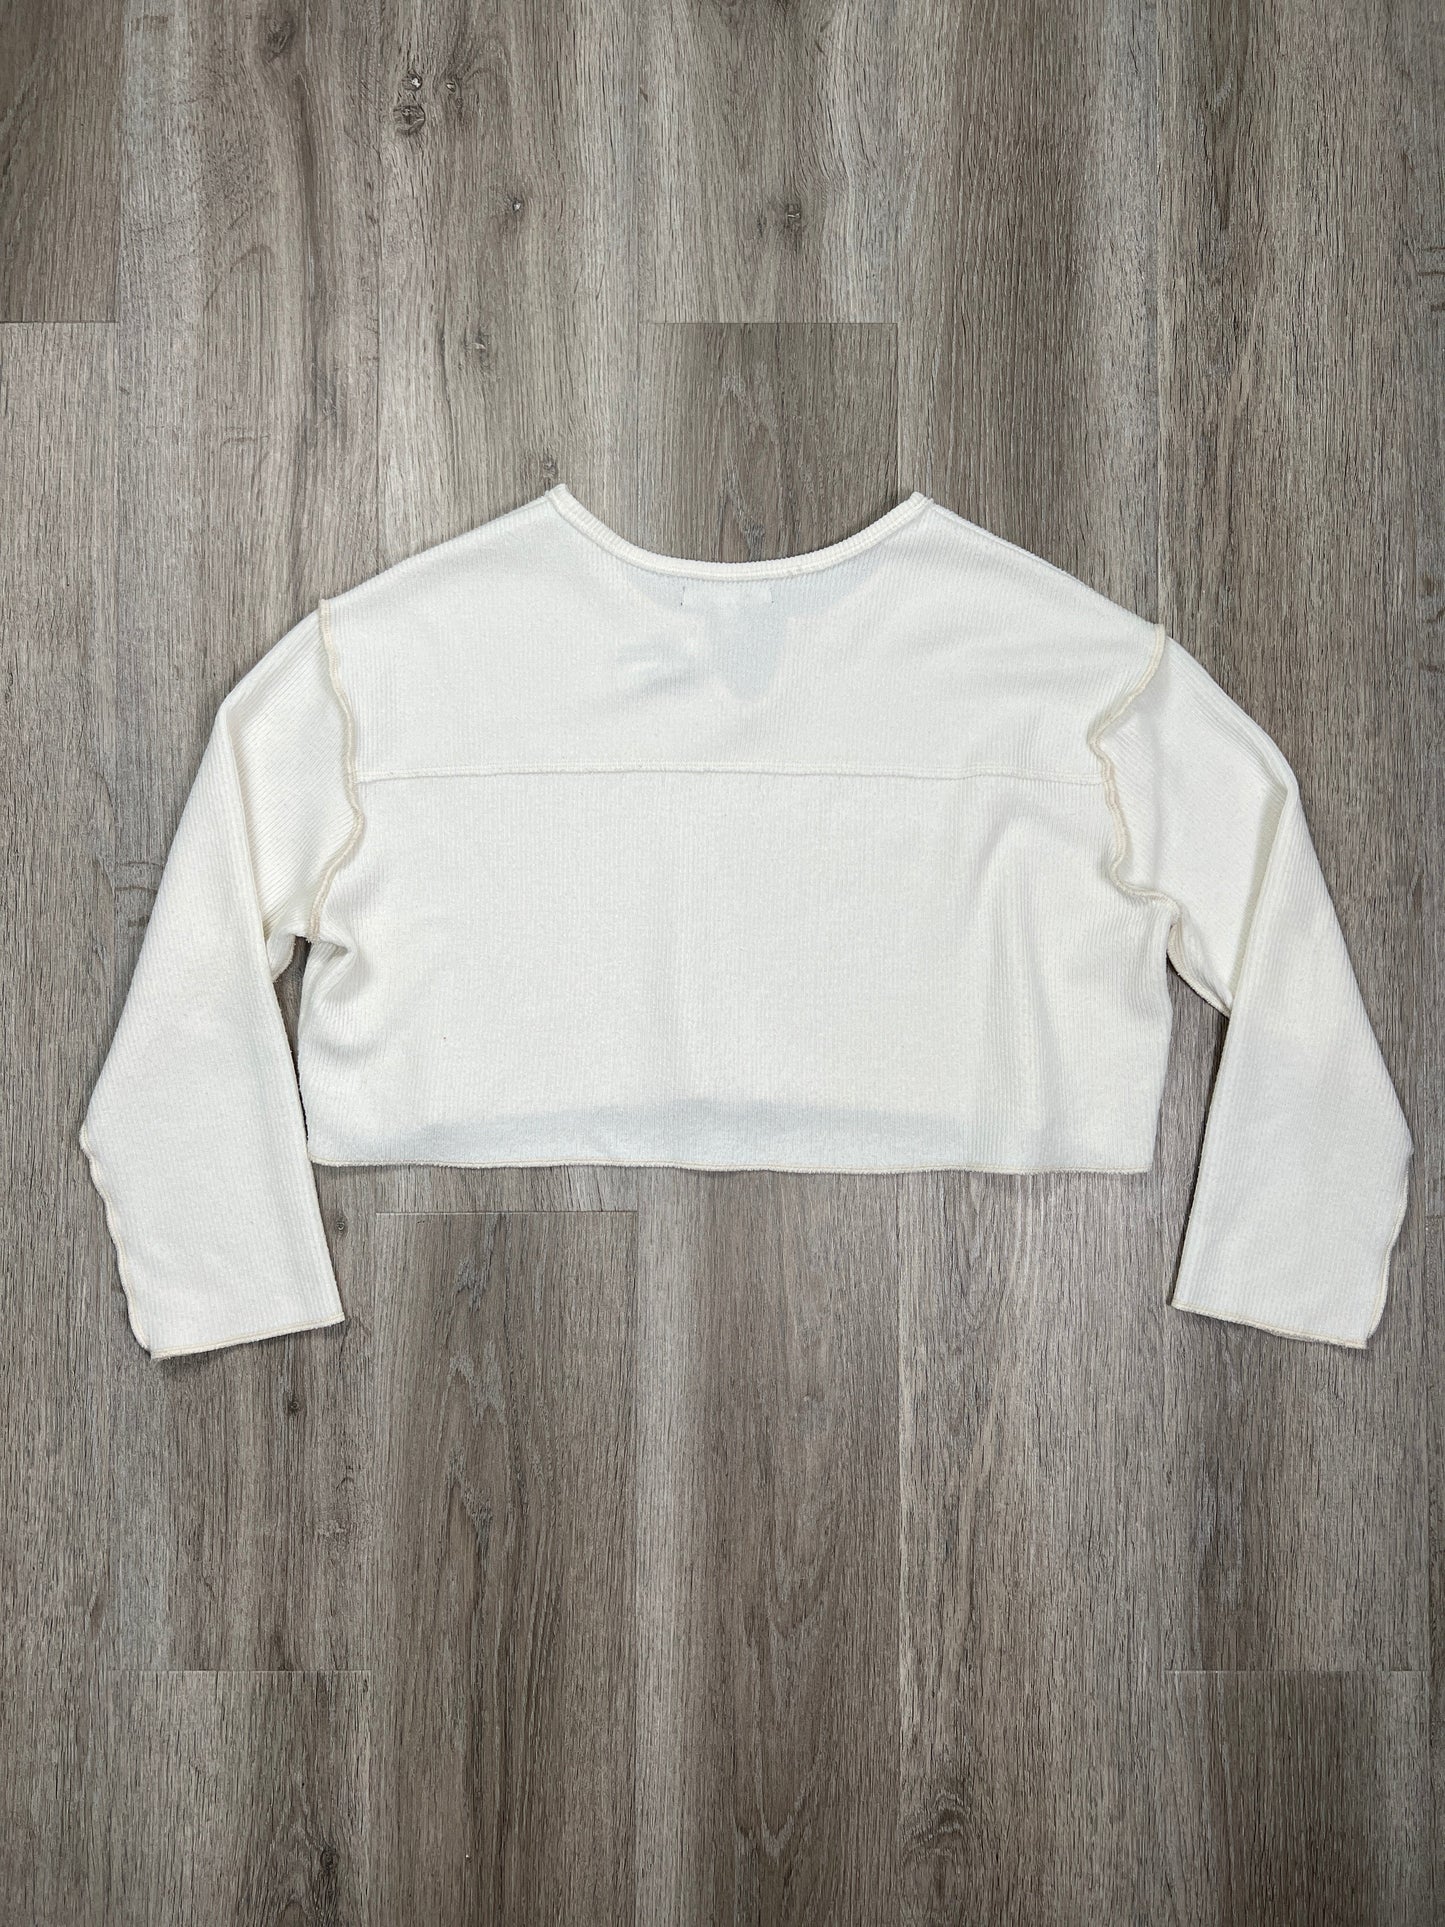 White Top Long Sleeve Urban Outfitters, Size M